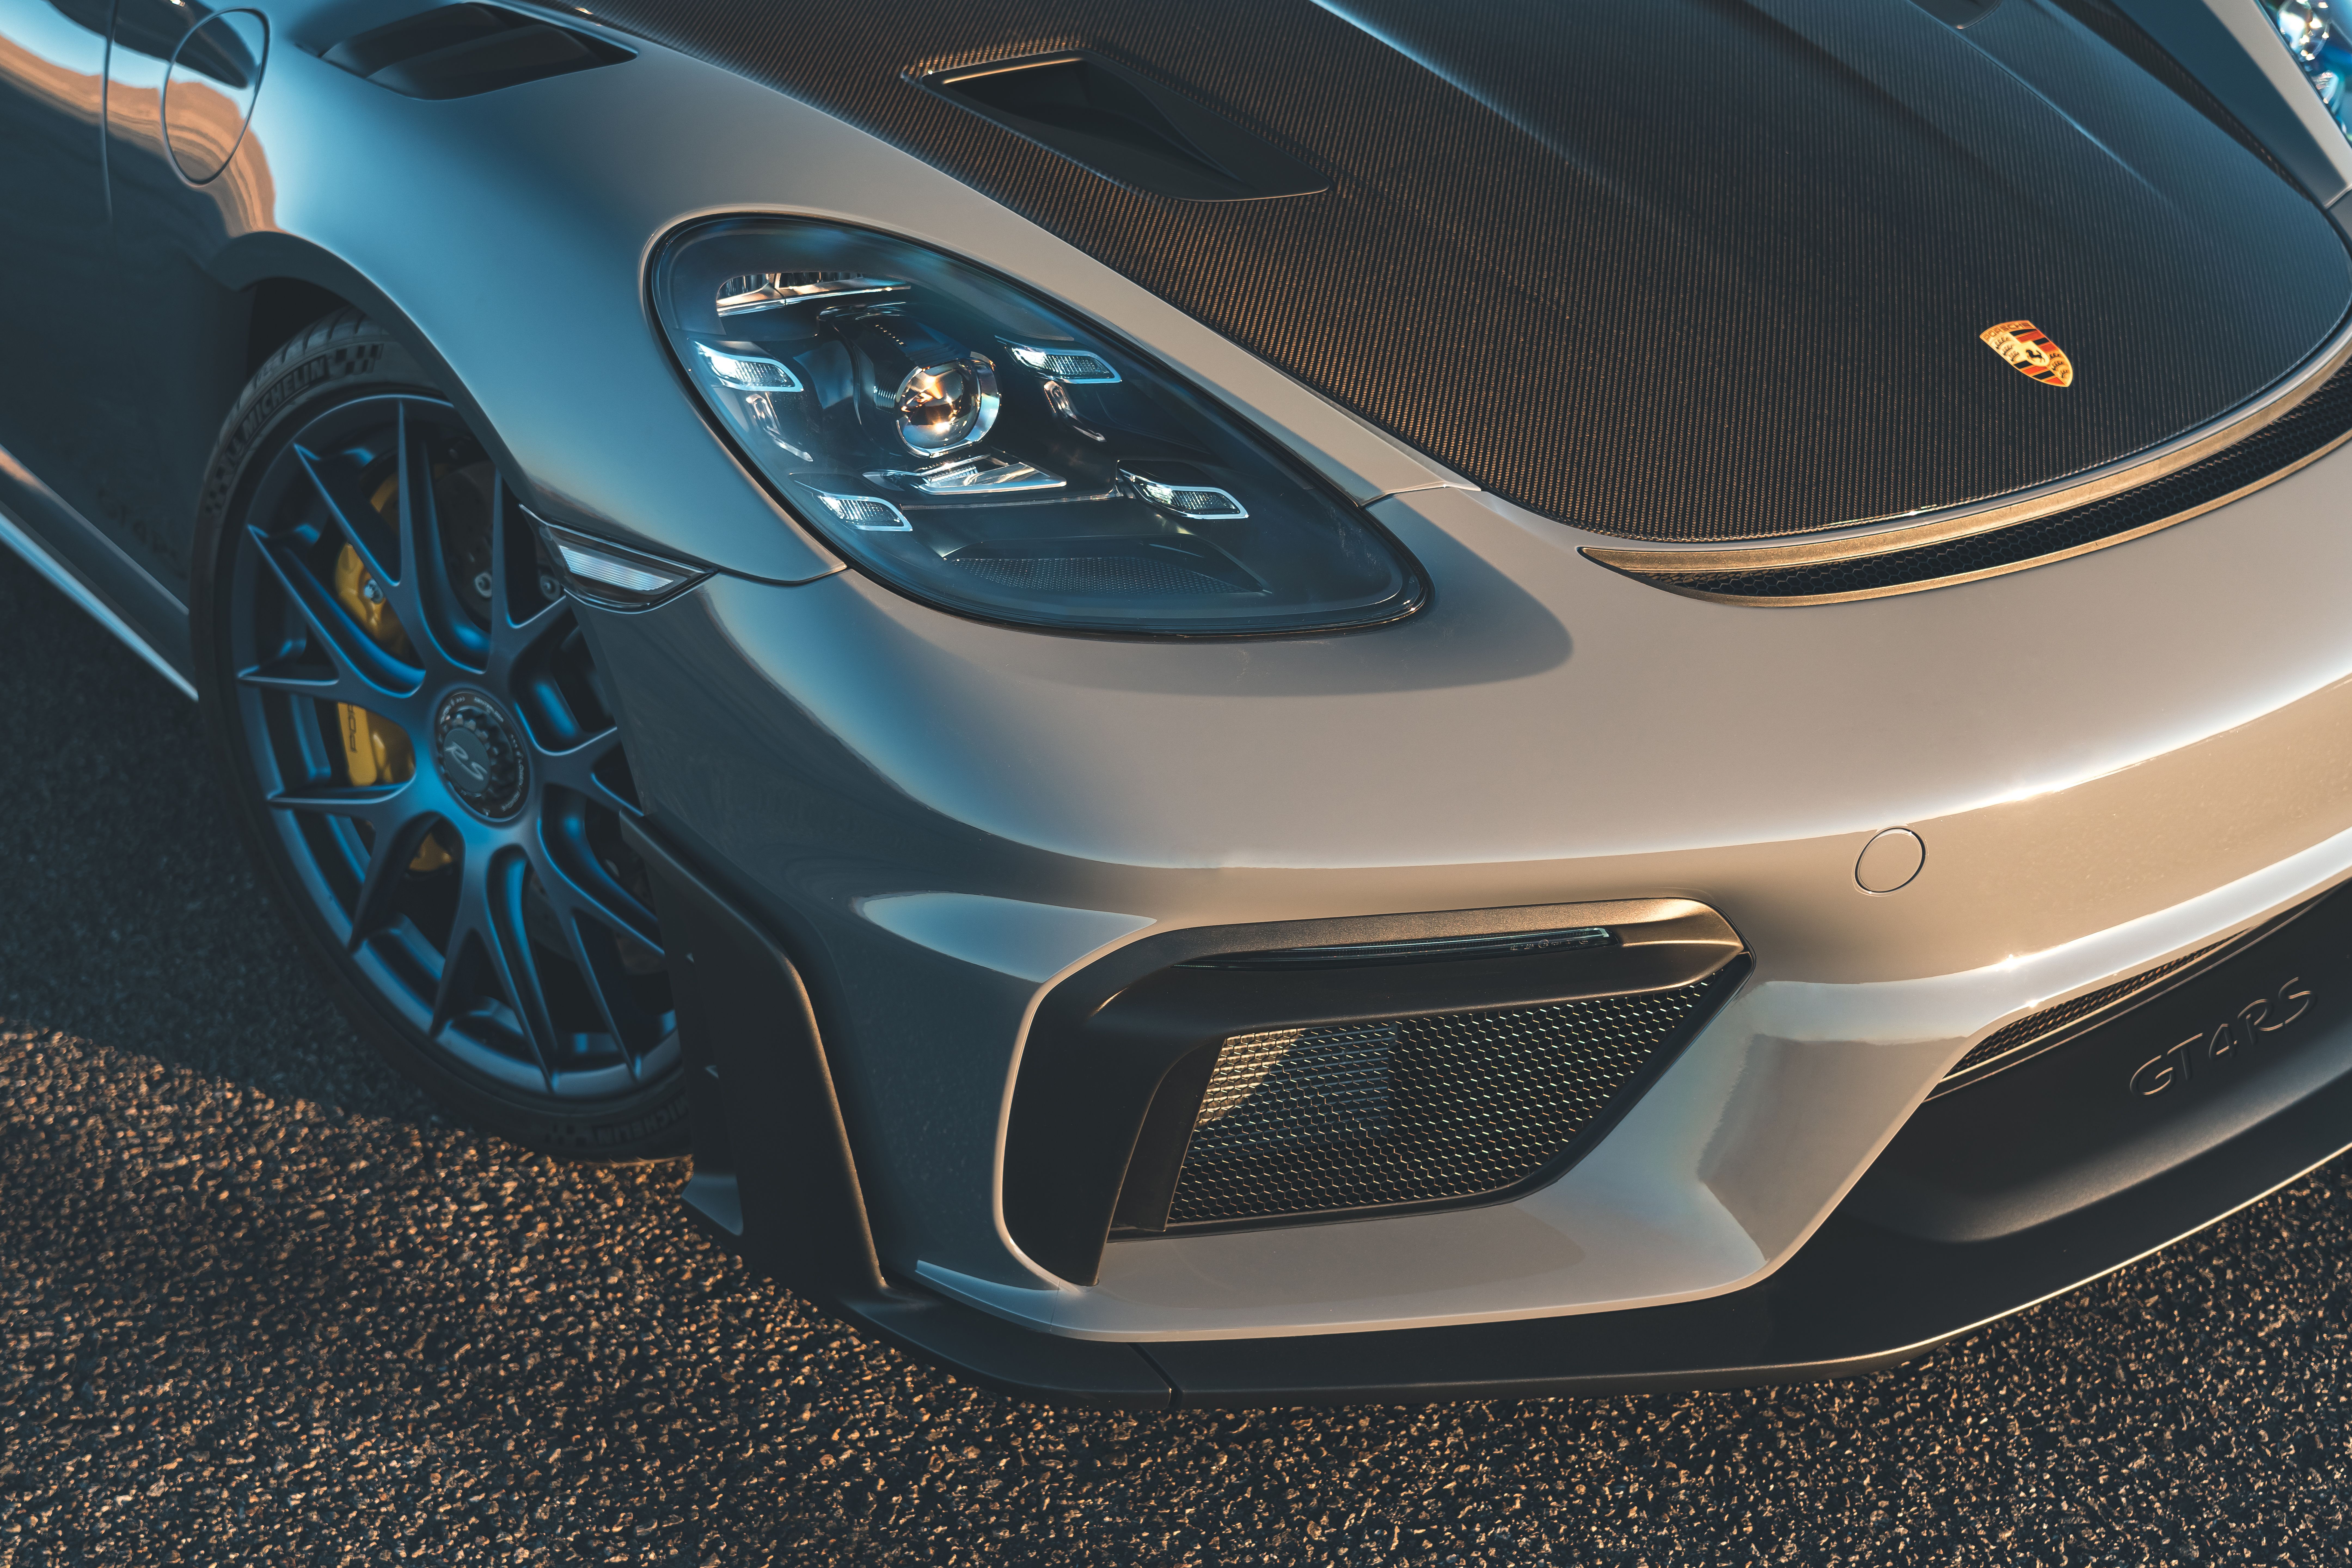 The front end of the Porsche Cayman GT4 RS.